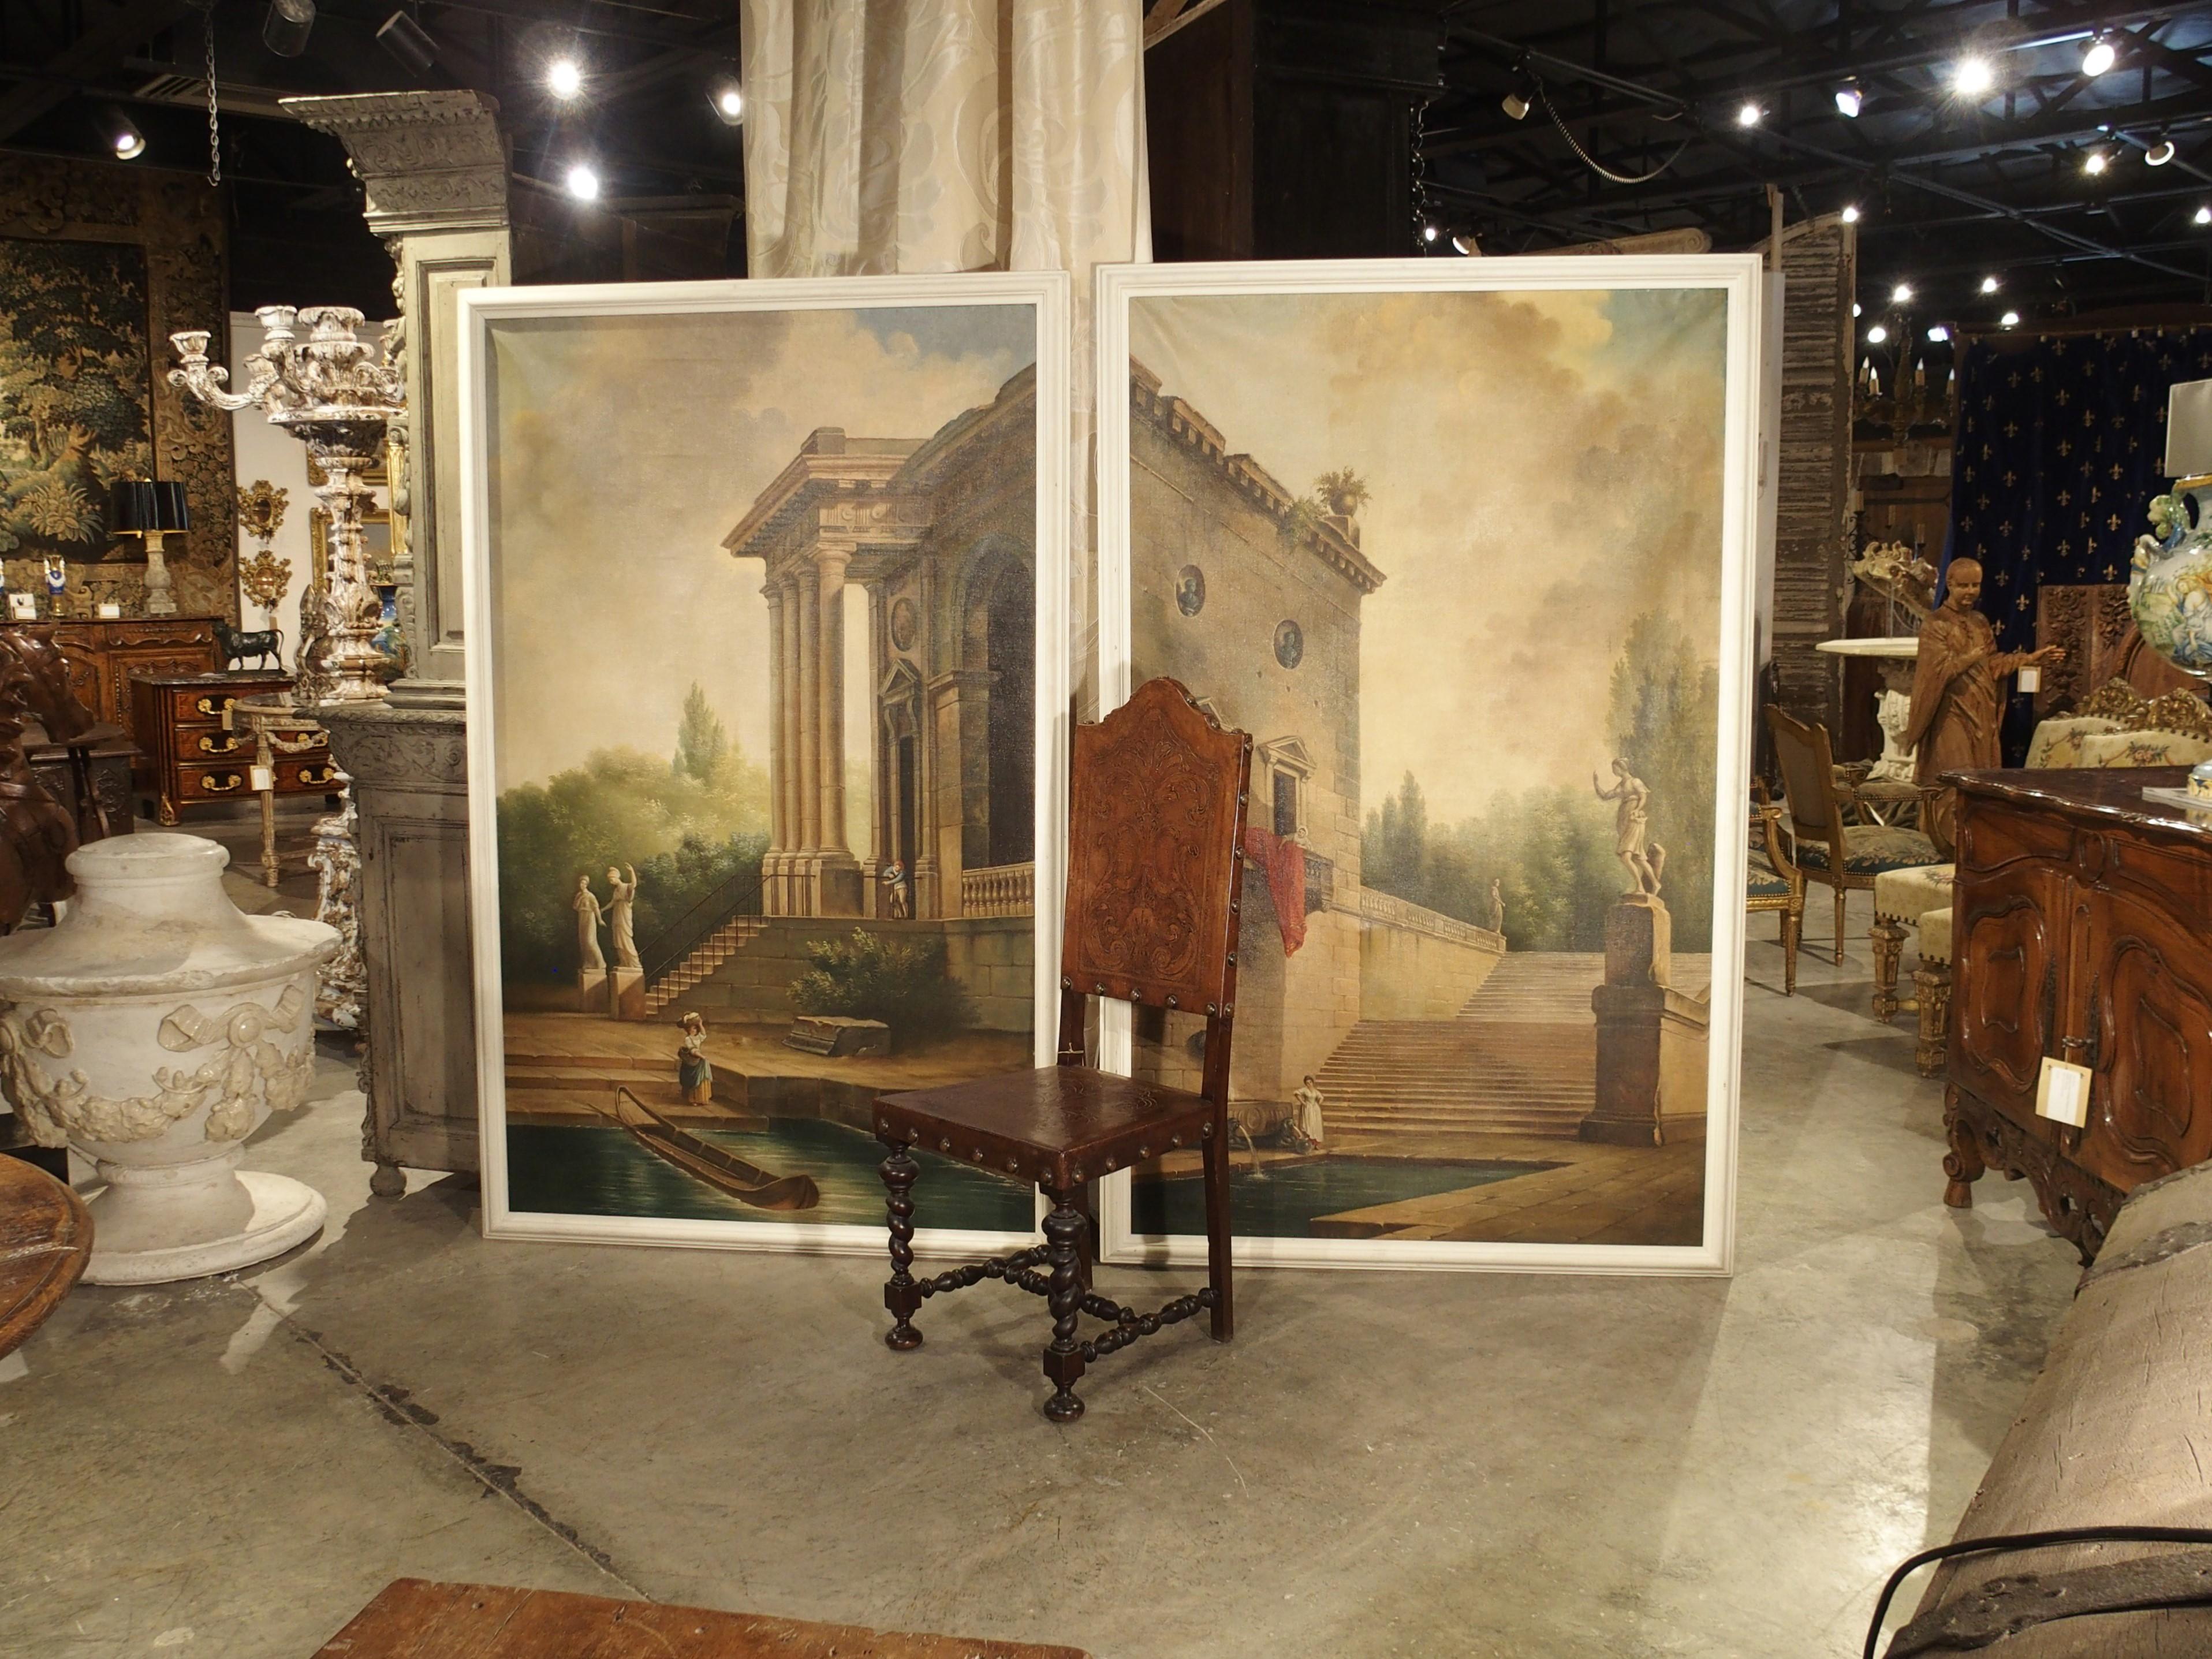 At over six feet tall, this pair of Italian landscape paintings from the early 1900s make quite a statement. The oil on canvas paintings are framed with white painted wood and are considered Capriccio paintings, which essentially means they are